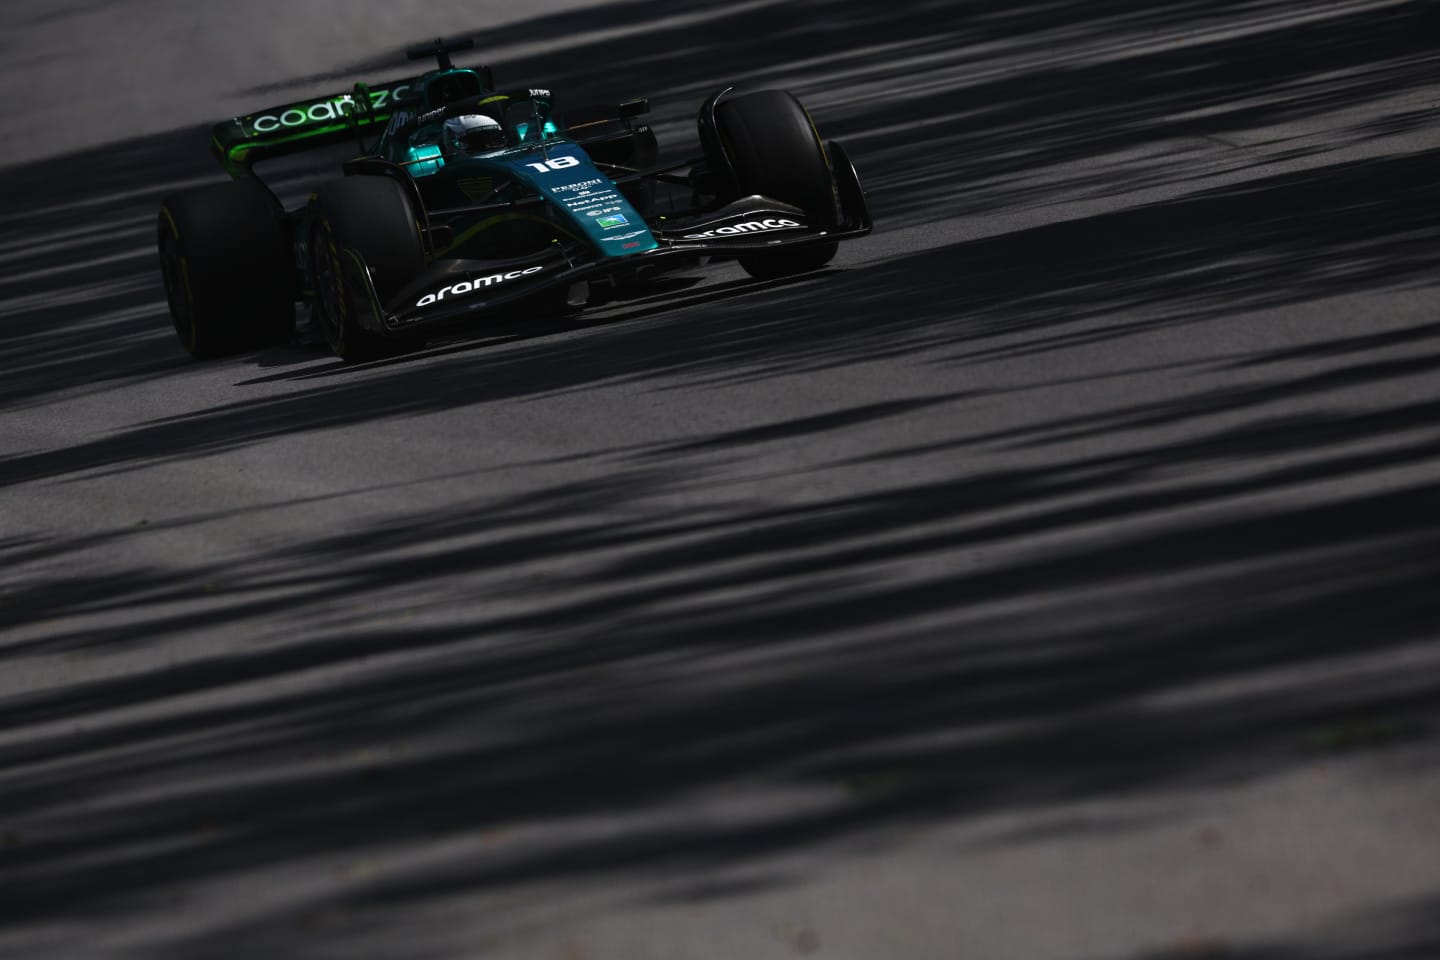 MONTREAL, QUEBEC - JUNE 17: Lance Stroll of Canada driving the (18) Aston Martin AMR22 Mercedes on track during practice ahead of the F1 Grand Prix of Canada at Circuit Gilles Villeneuve on June 17, 2022 in Montreal, Quebec. (Photo by Clive Rose/Getty Images)